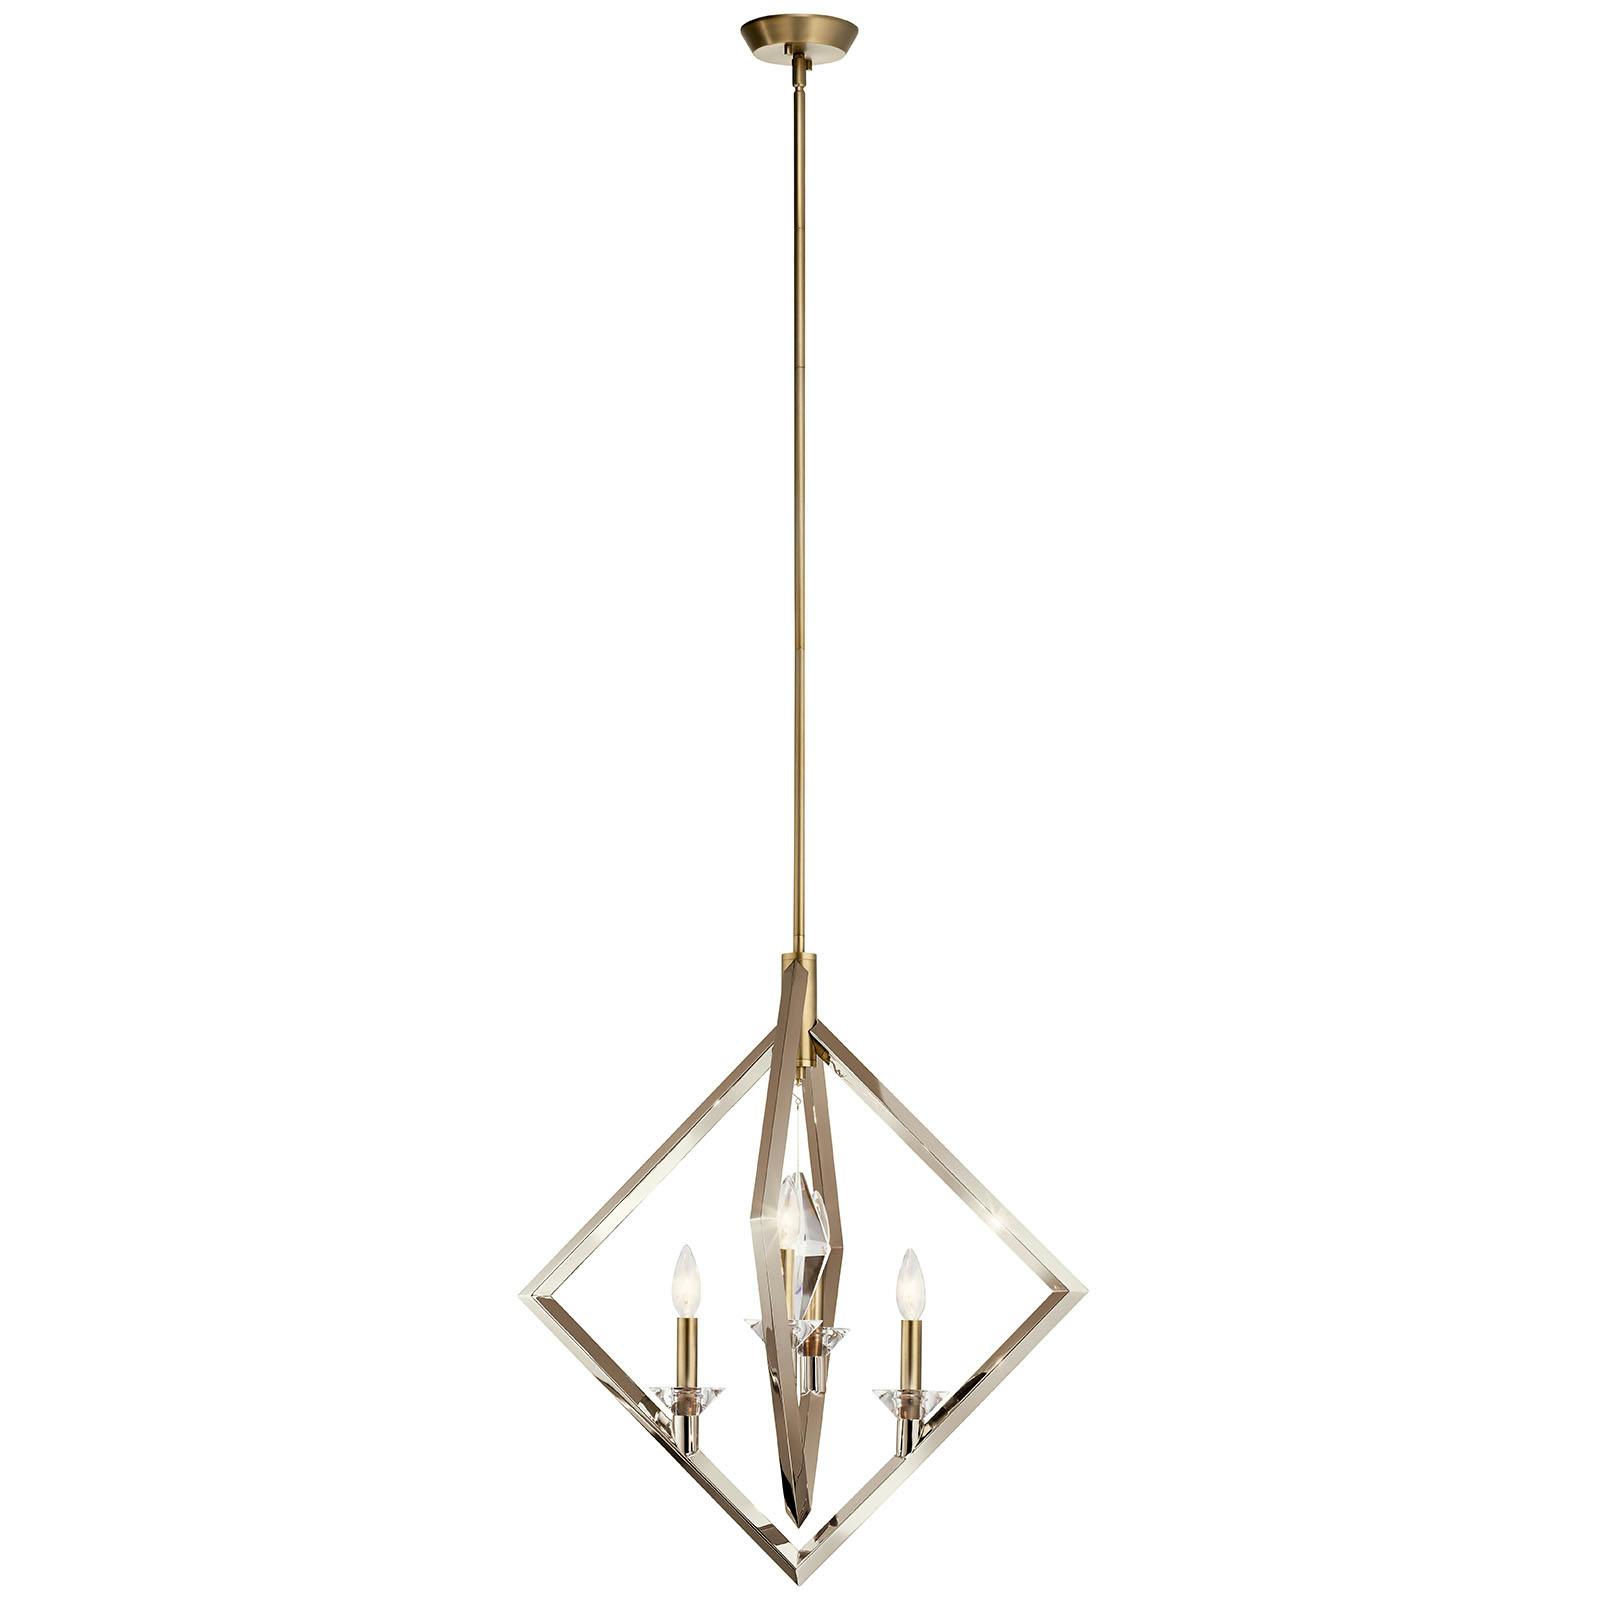 Profile view of the Layan™ 4 Light Pendant Polished Nickel on a white background